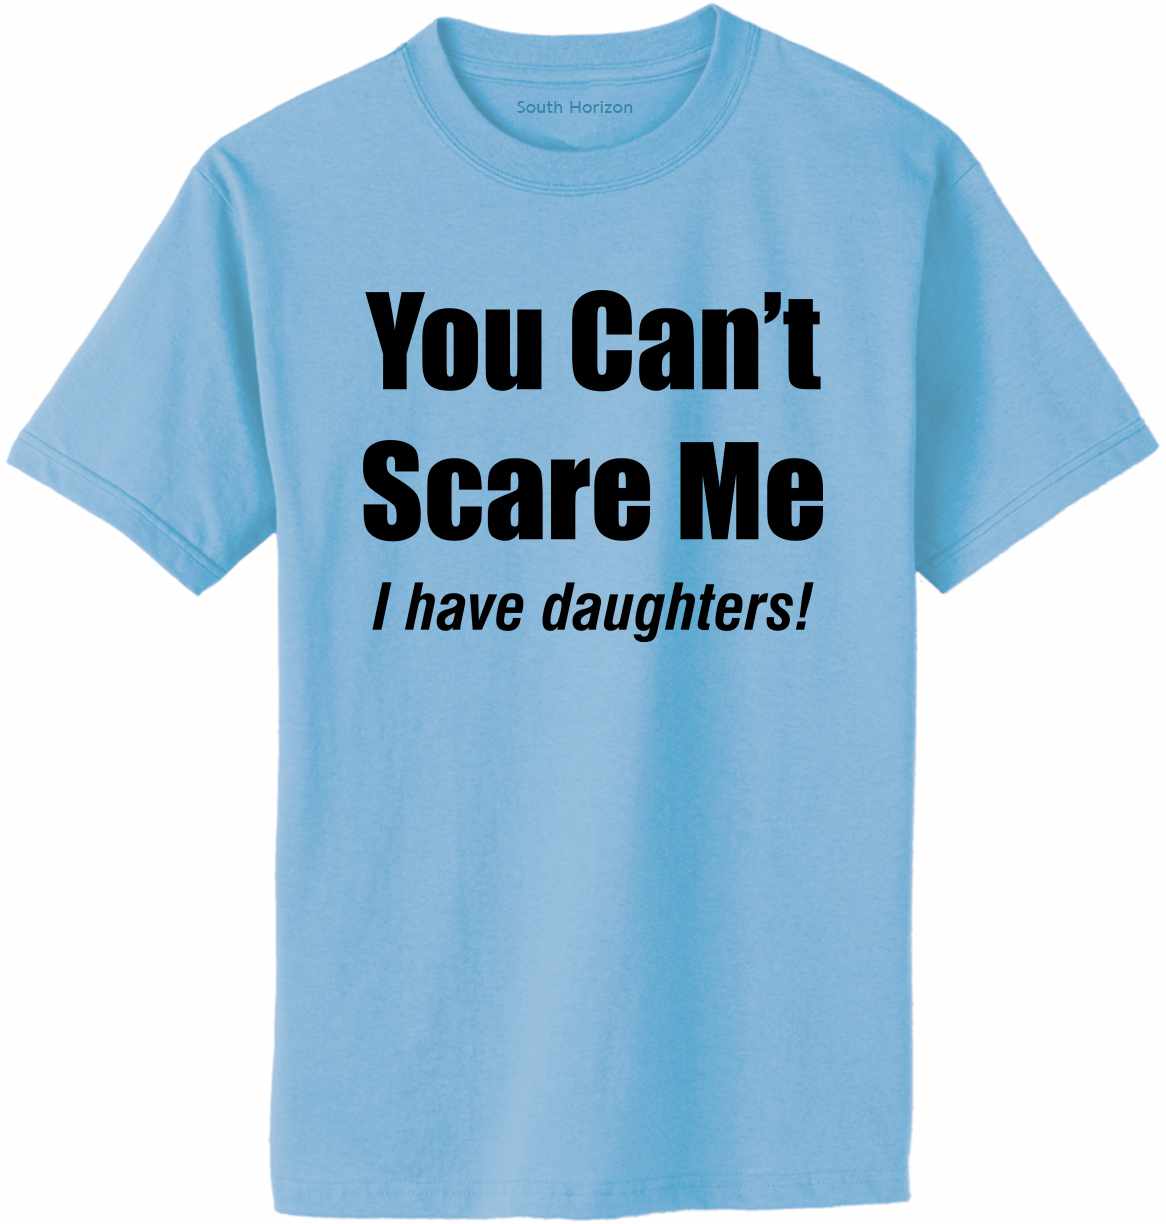 You Can't Scare Me, I have Daughters Adult T-Shirt (#947-1)